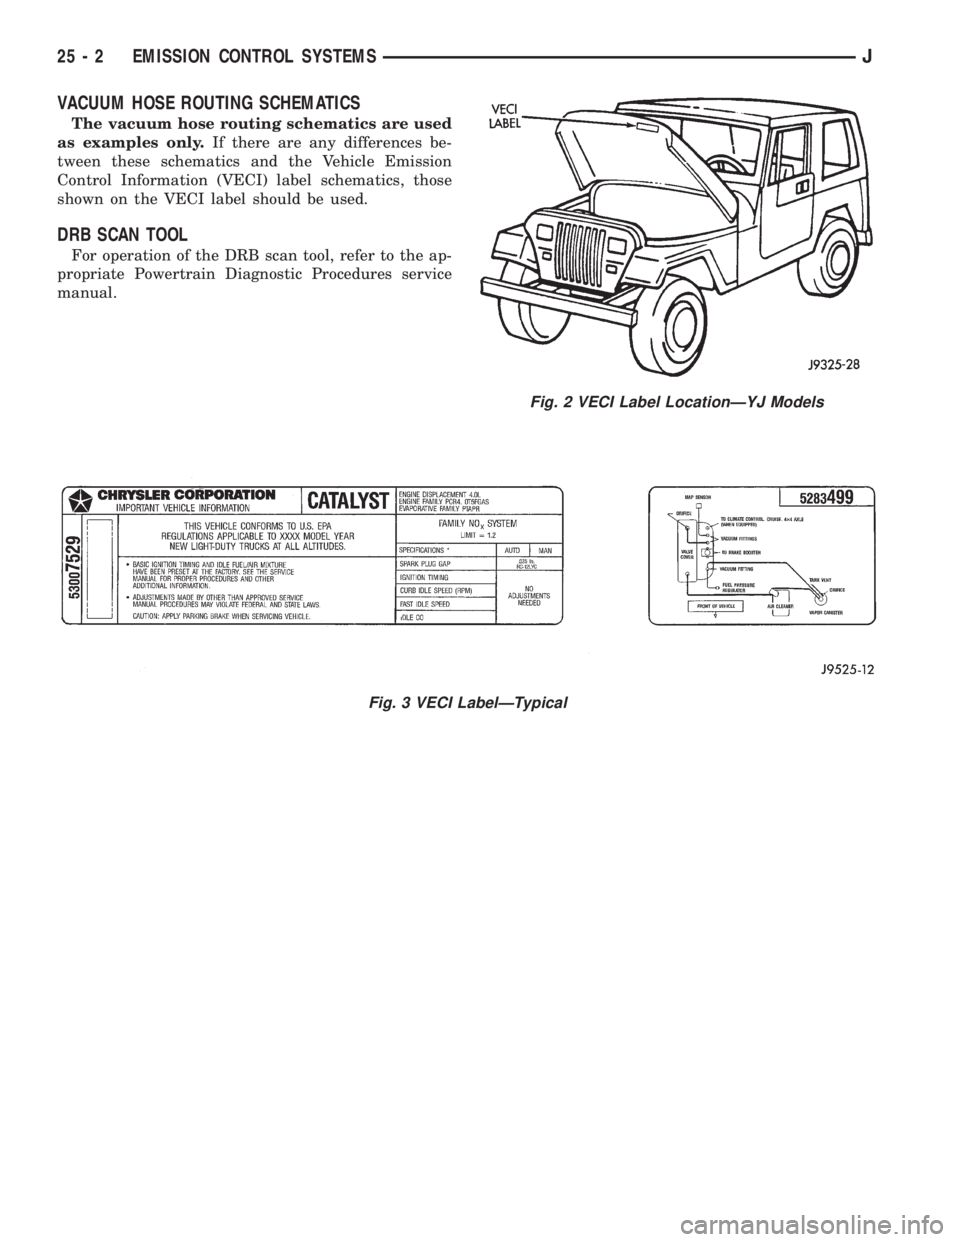 JEEP XJ 1995  Service And Repair Manual VACUUM HOSE ROUTING SCHEMATICS
The vacuum hose routing schematics are used
as examples only.If there are any differences be-
tween these schematics and the Vehicle Emission
Control Information (VECI) 